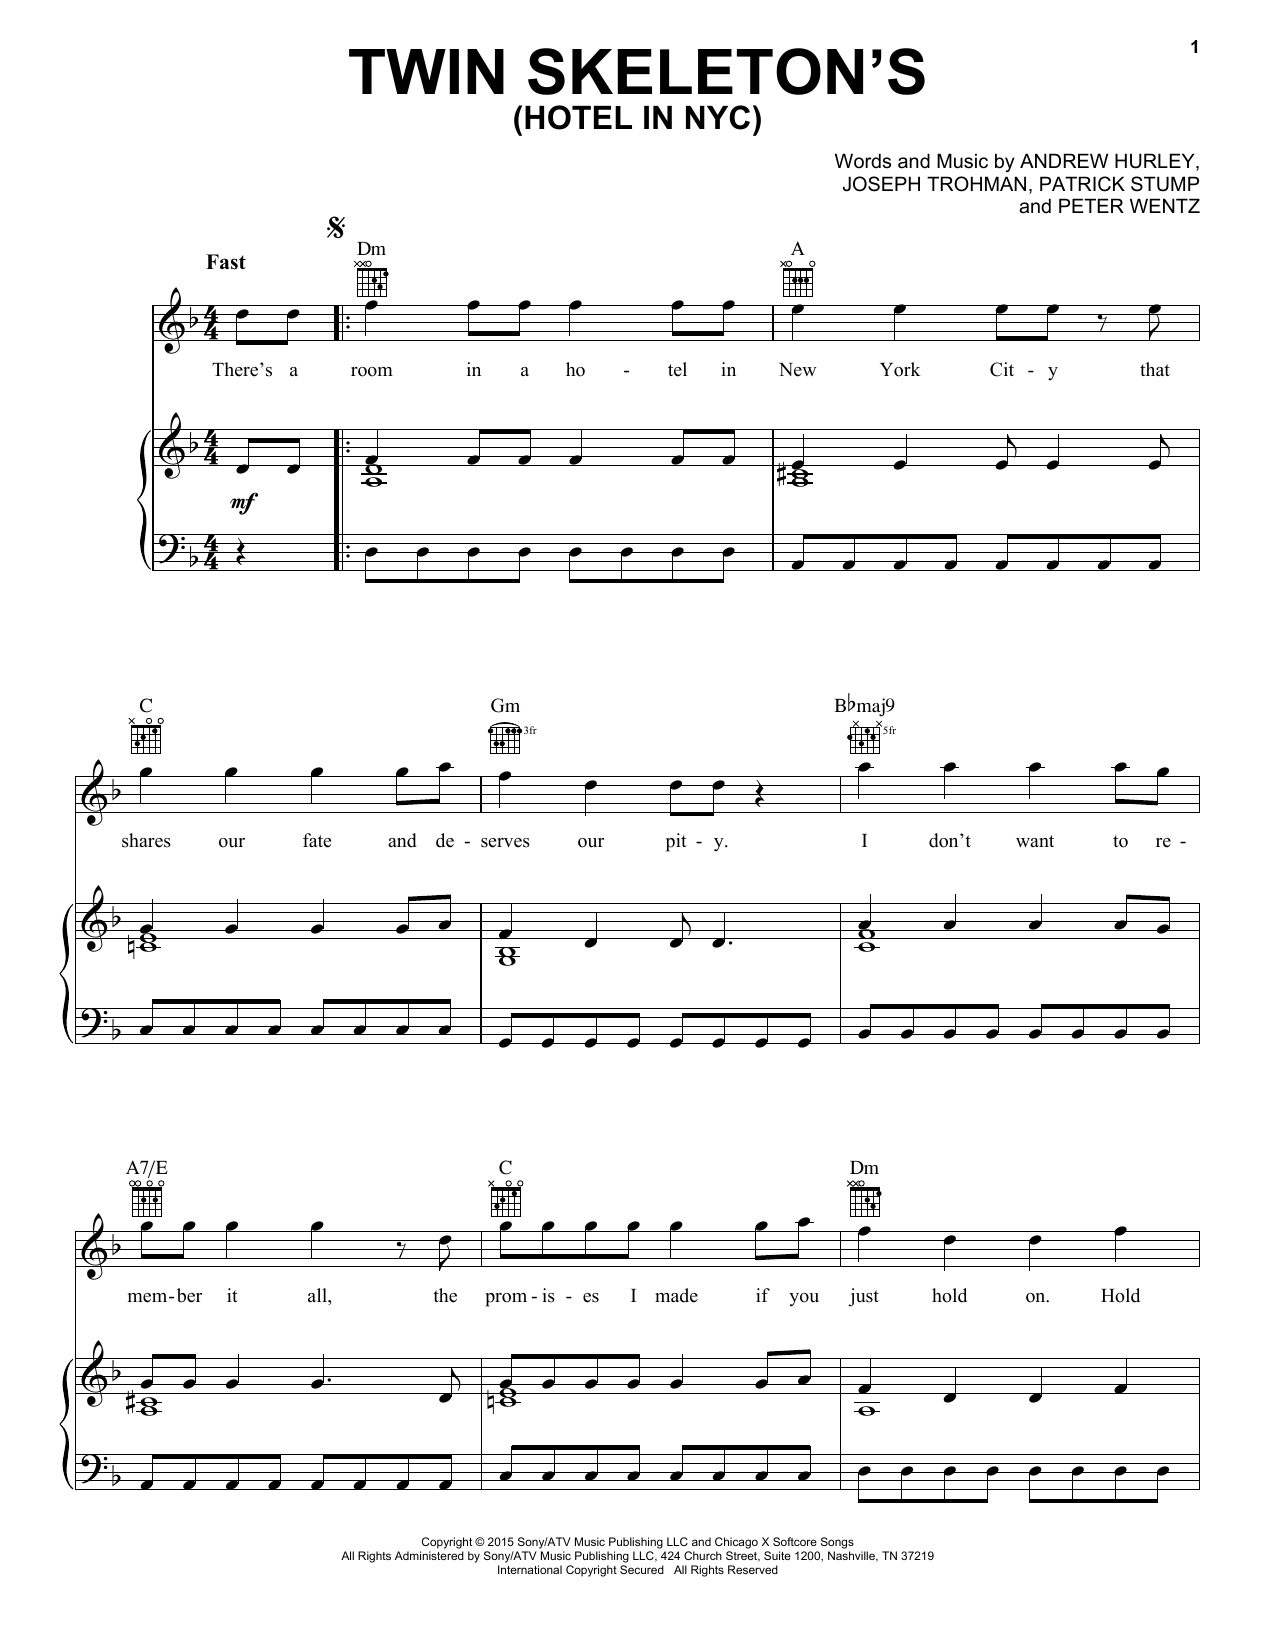 Download Fall Out Boy Twin Skeleton's (Hotel In NYC) Sheet Music